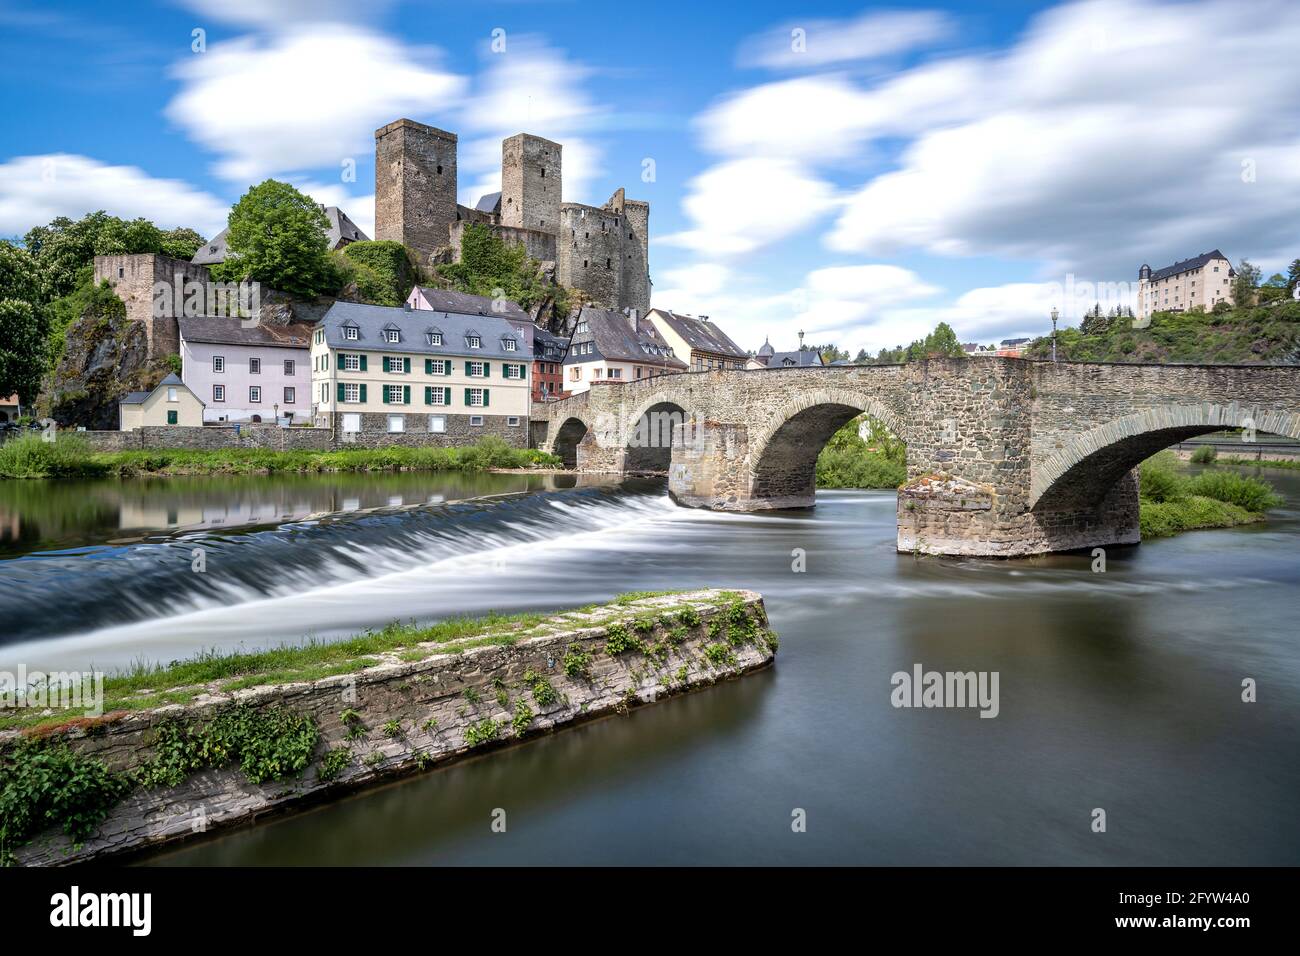 river Lahn in Runkel, Germany with old stone bridge and castle (taken with neutral-density filter) Stock Photo